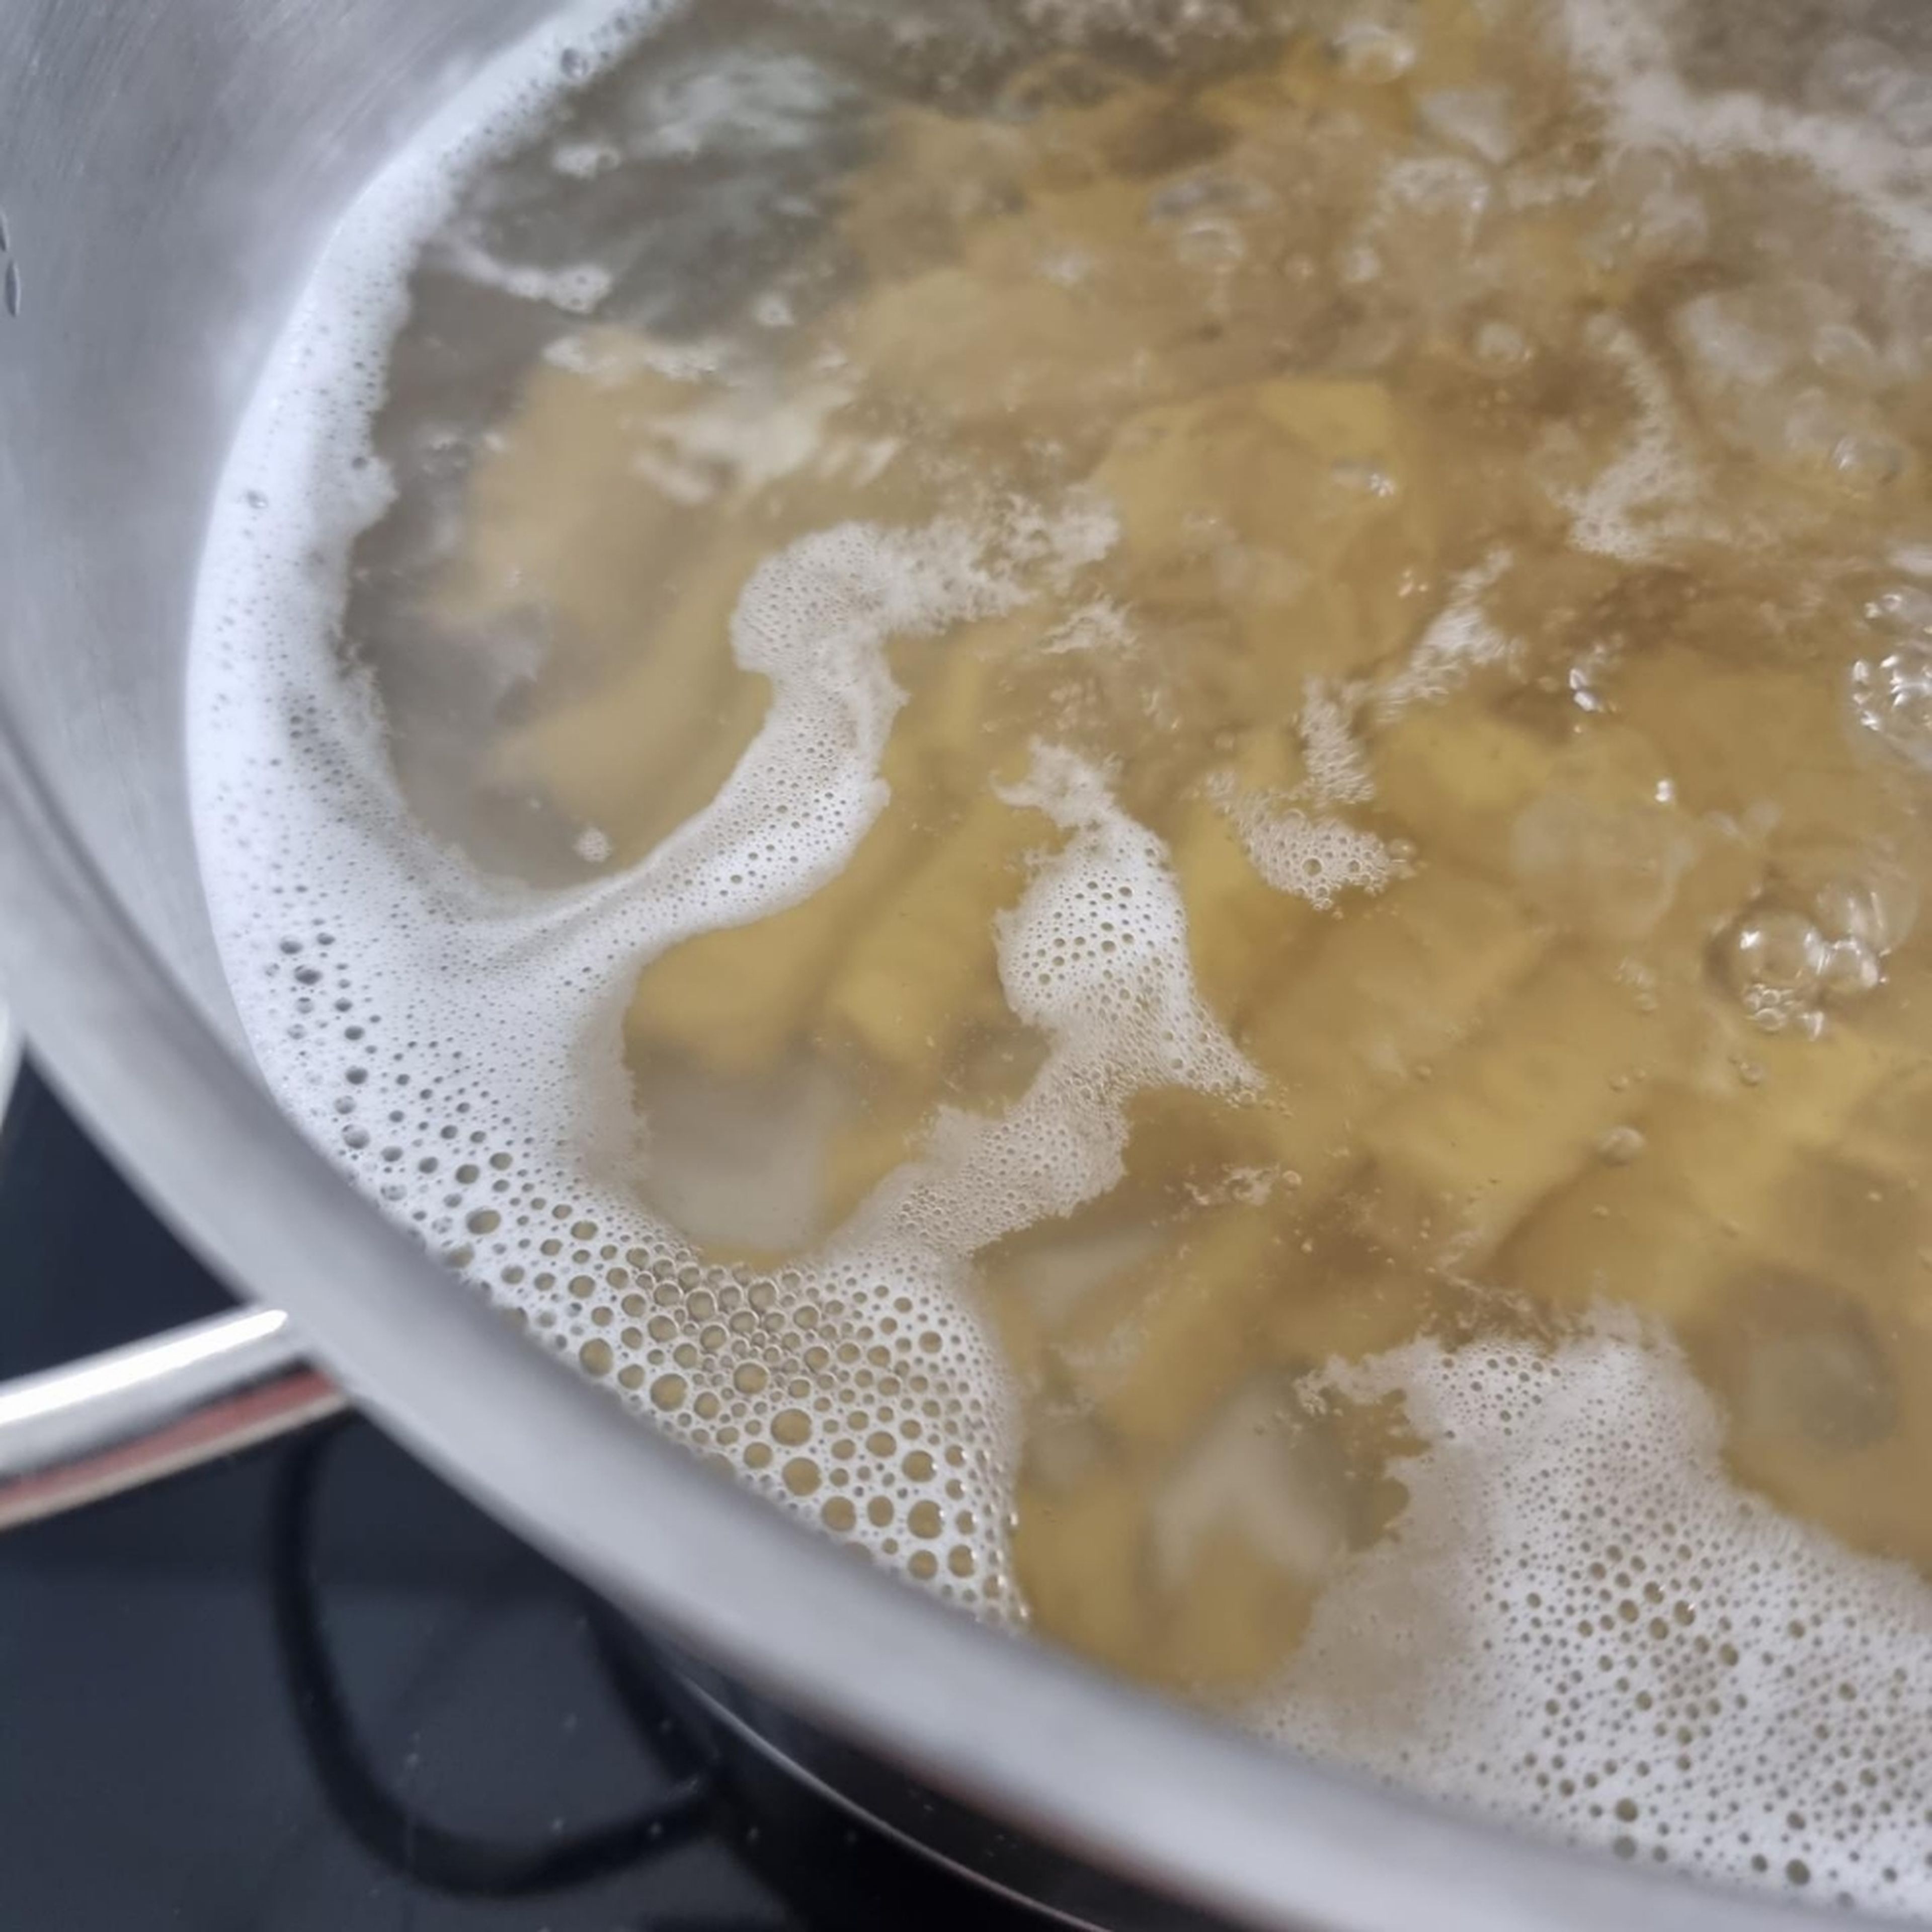 In a pot, bring water to a boil and add salt. Cook the pasta according to package instructions.